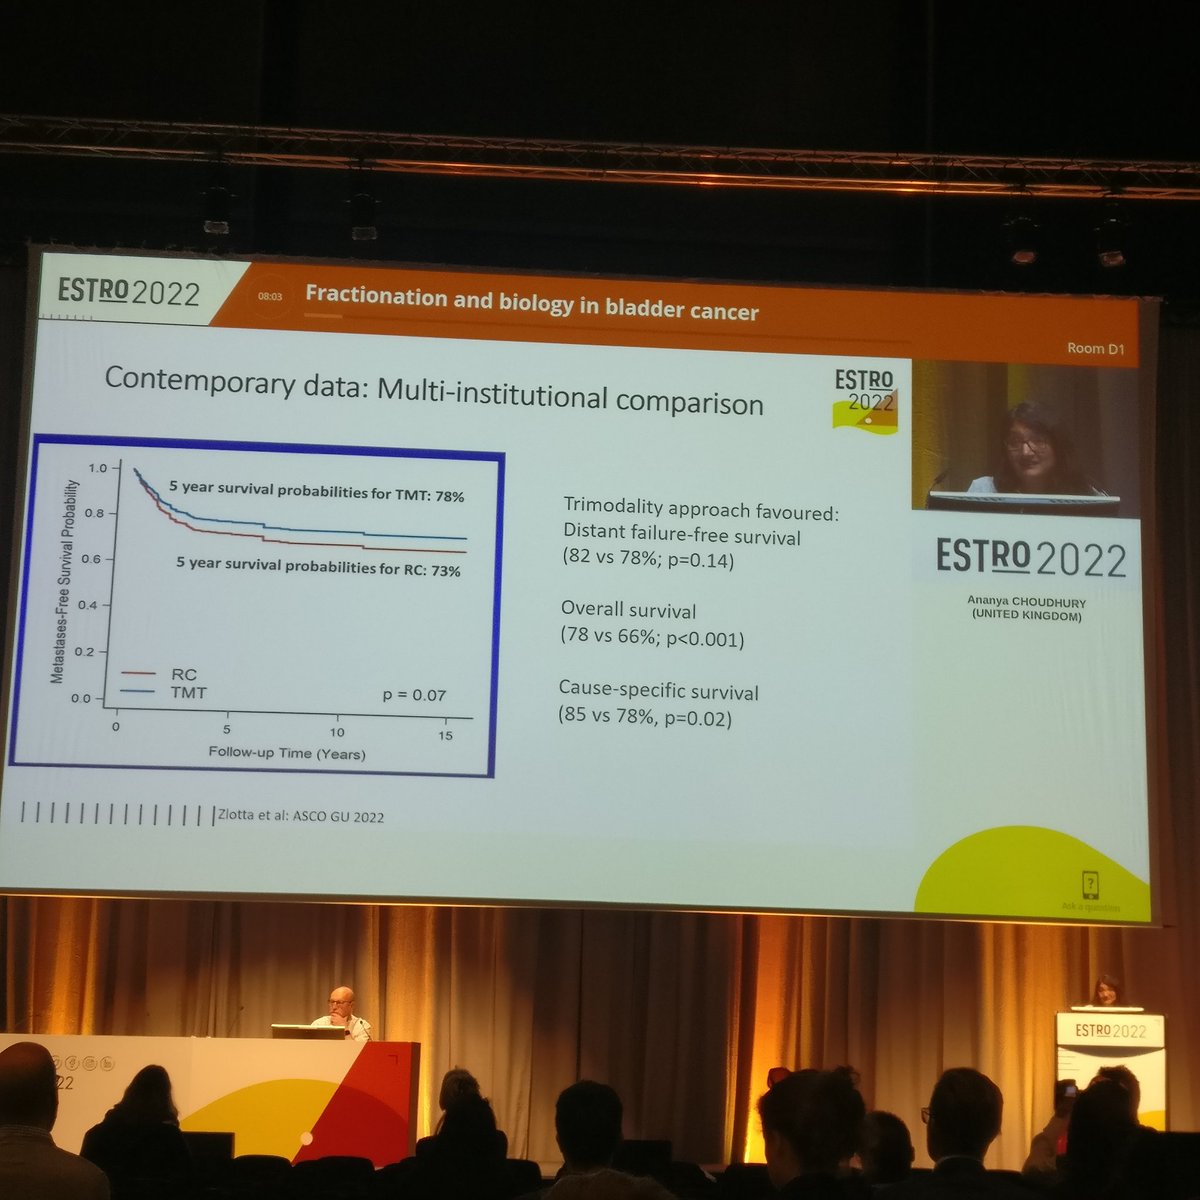 Surgery is no longer the standard of care in #bladdercancer.
#ESTRO2022